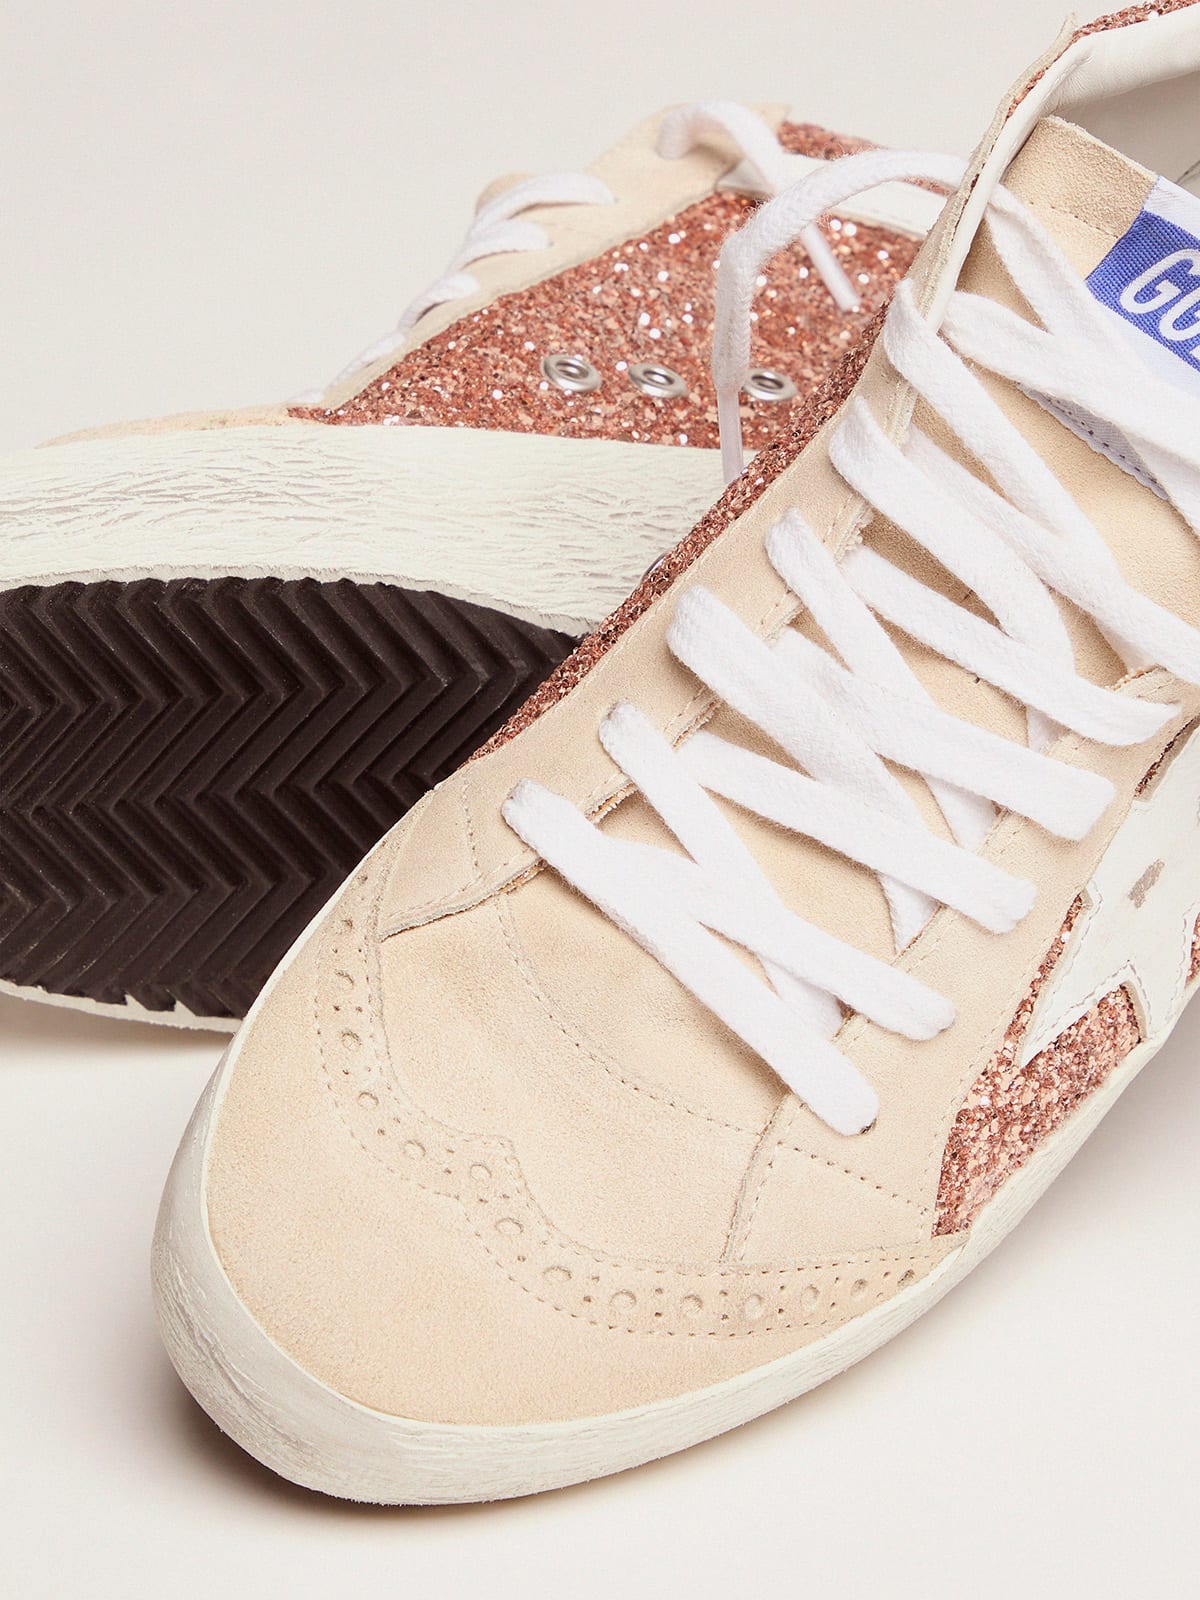 Golden Goose - Sneakers Mid Star avec paillettes or rose in 